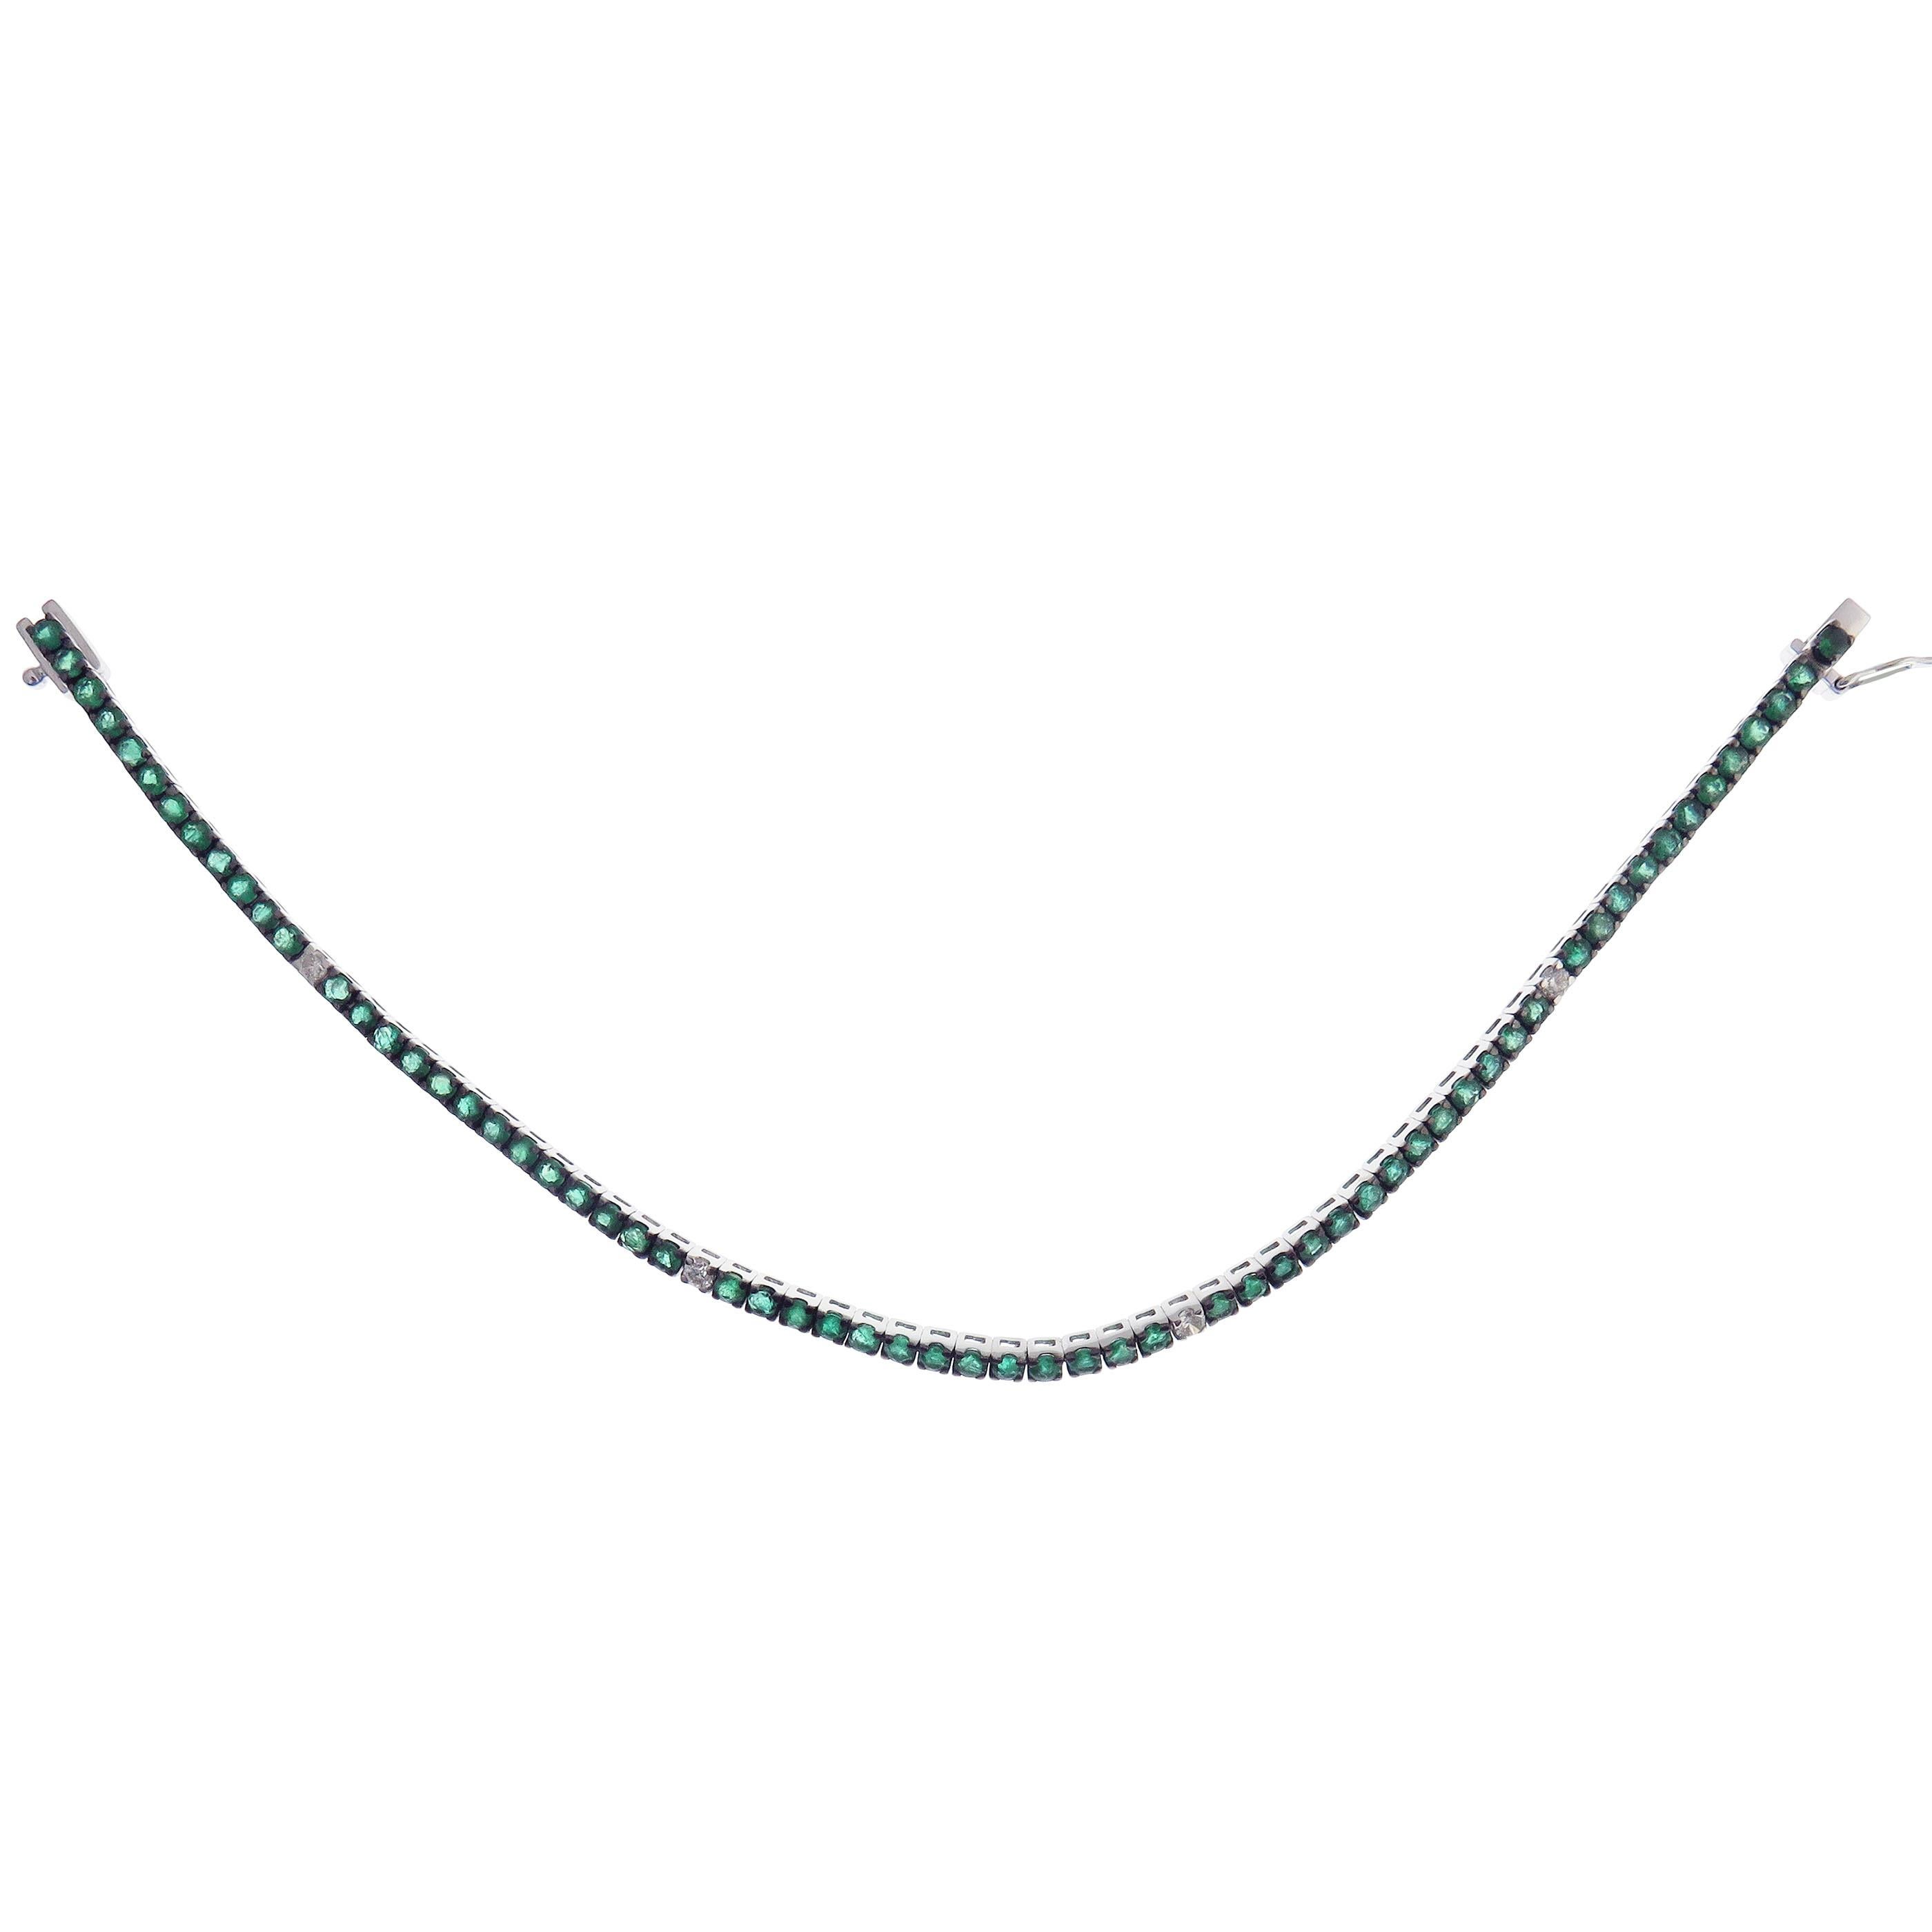 This bracelet is crafted in 18-karat white gold, weighing approximately 0.20 total carats of SI Quality white diamonds and 3.30 total carats of Emerald stones. 

Bracelet is approximately 7